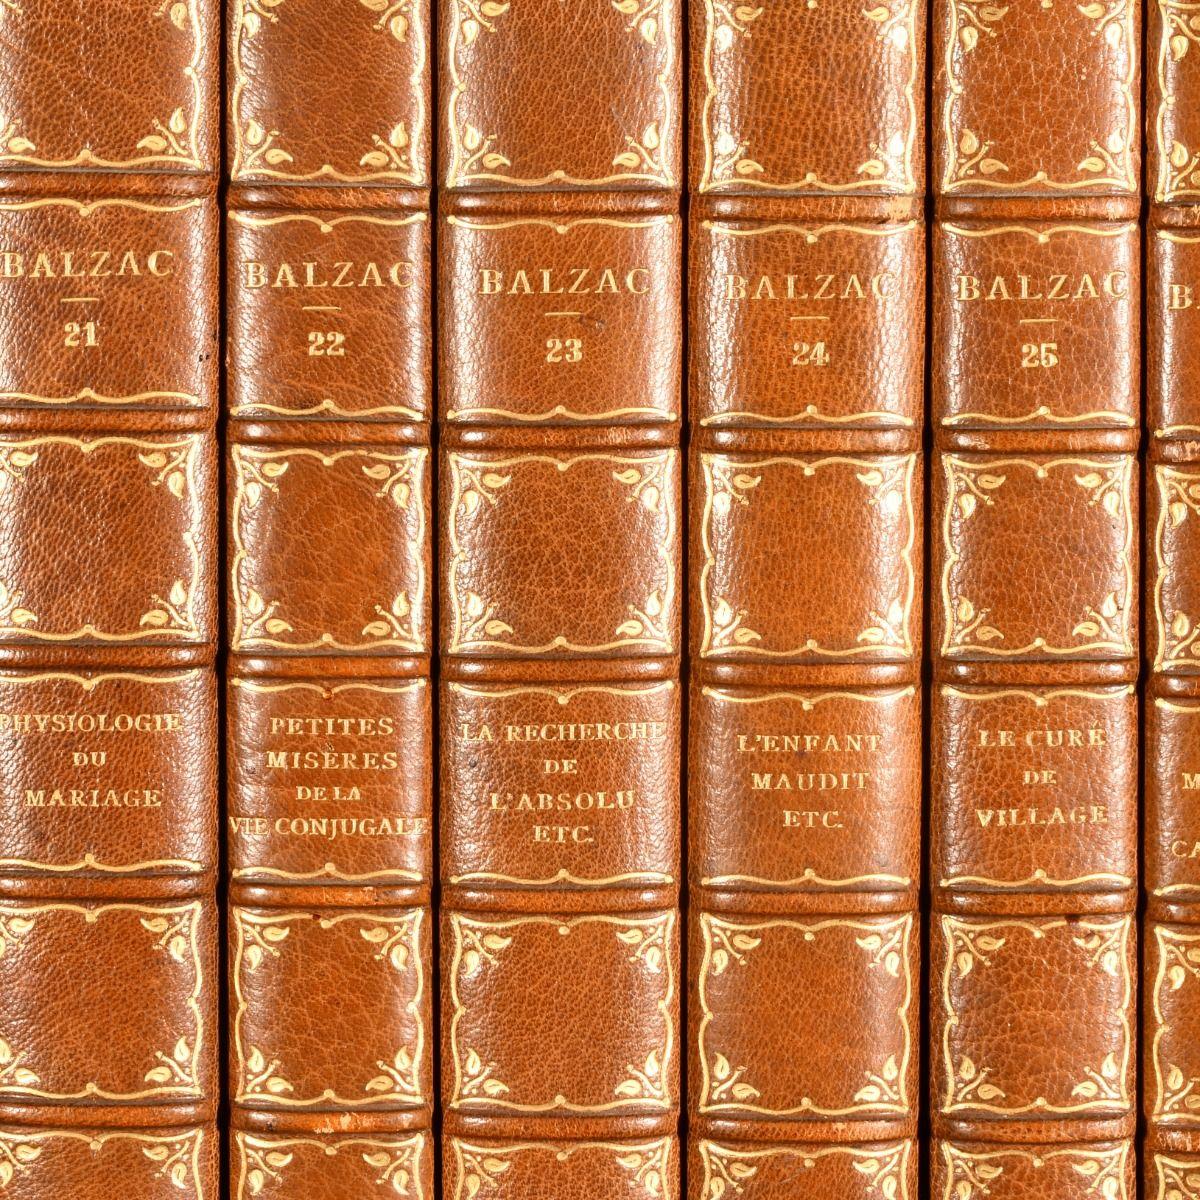 The complete magnum opus of French novelist Honoré de Balzac 'La Comedie Humaine' in beautiful uniform Riverside Press half crushed morocco bindings.

Undated Paris edition published by George Barrie, comprised of forty-five volumes in uniform